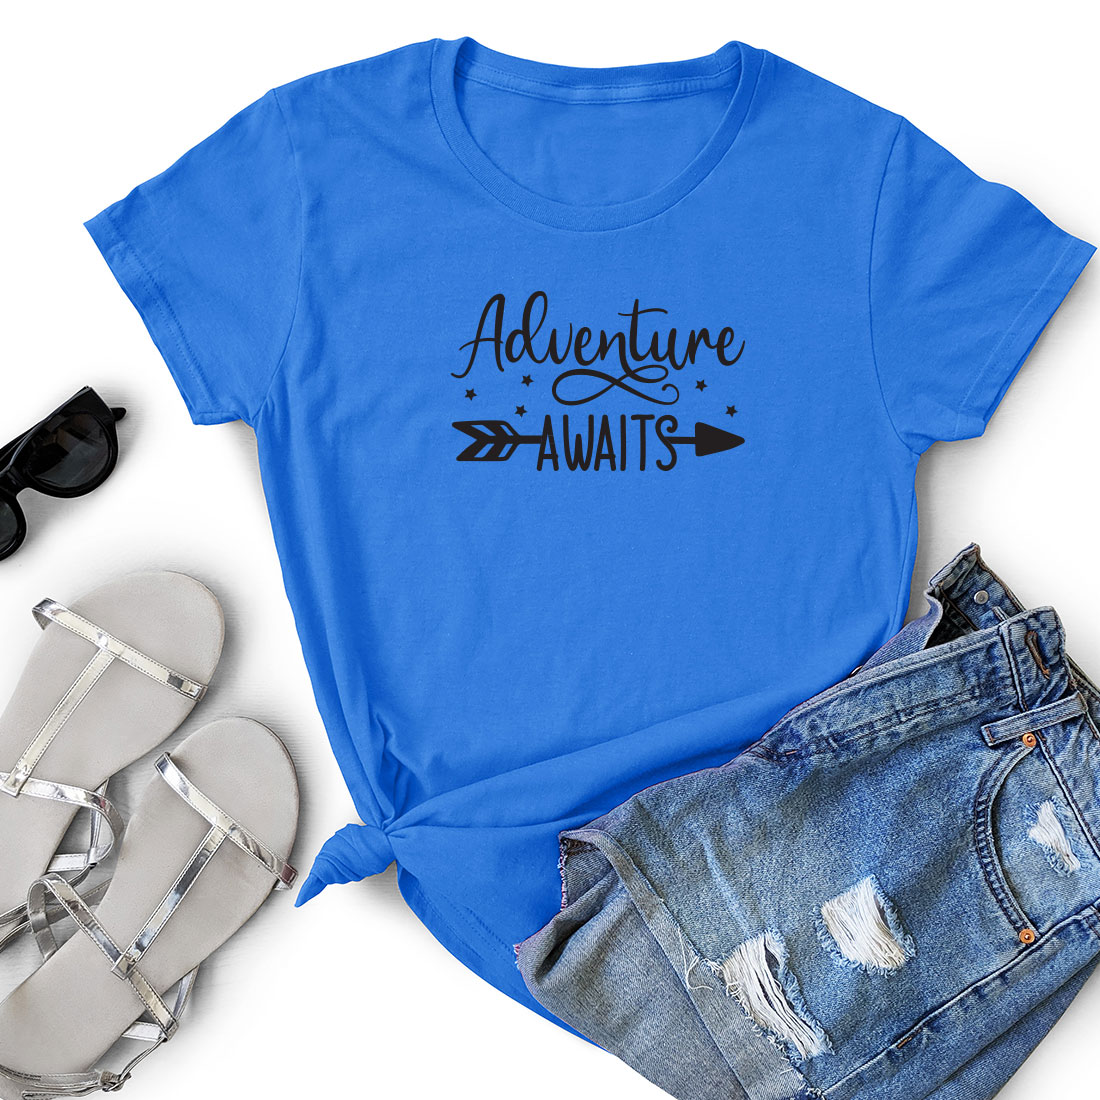 T - shirt that says adventure awaits next to a pair of shorts.